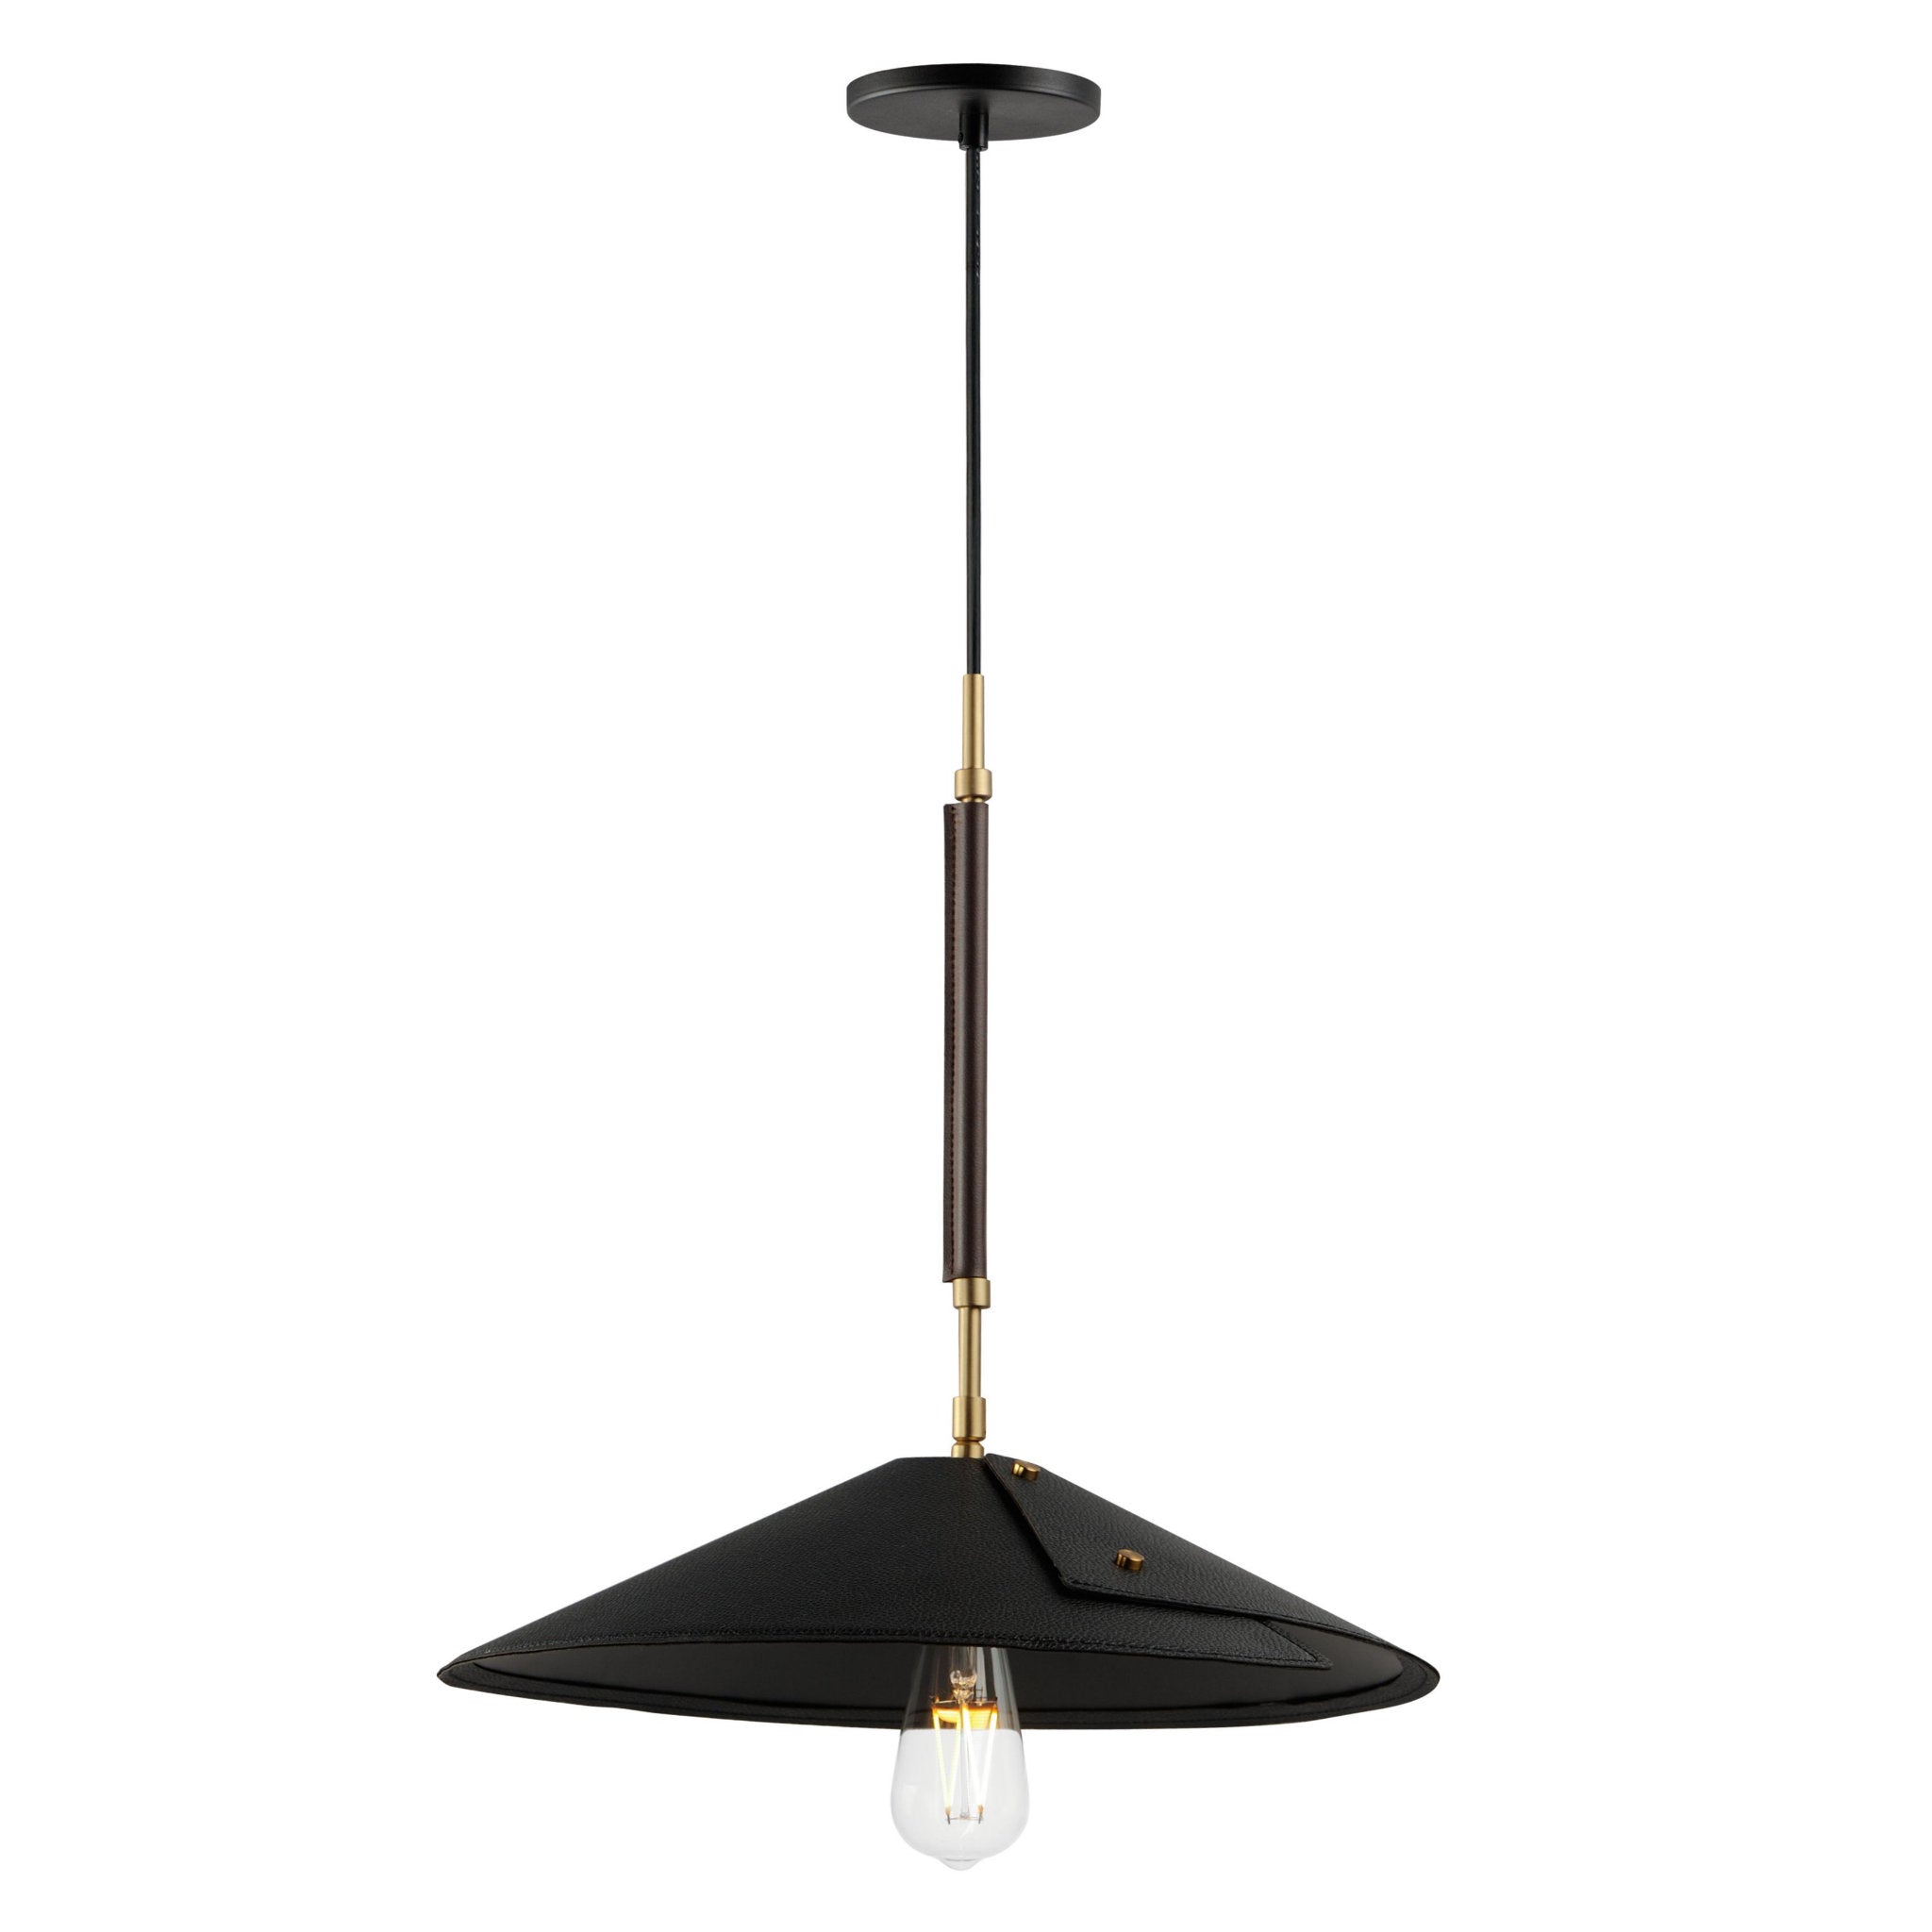 Studio M SM81806NAB Cavalier 16" Pendant in Natural Aged Brass by Mat Sanders